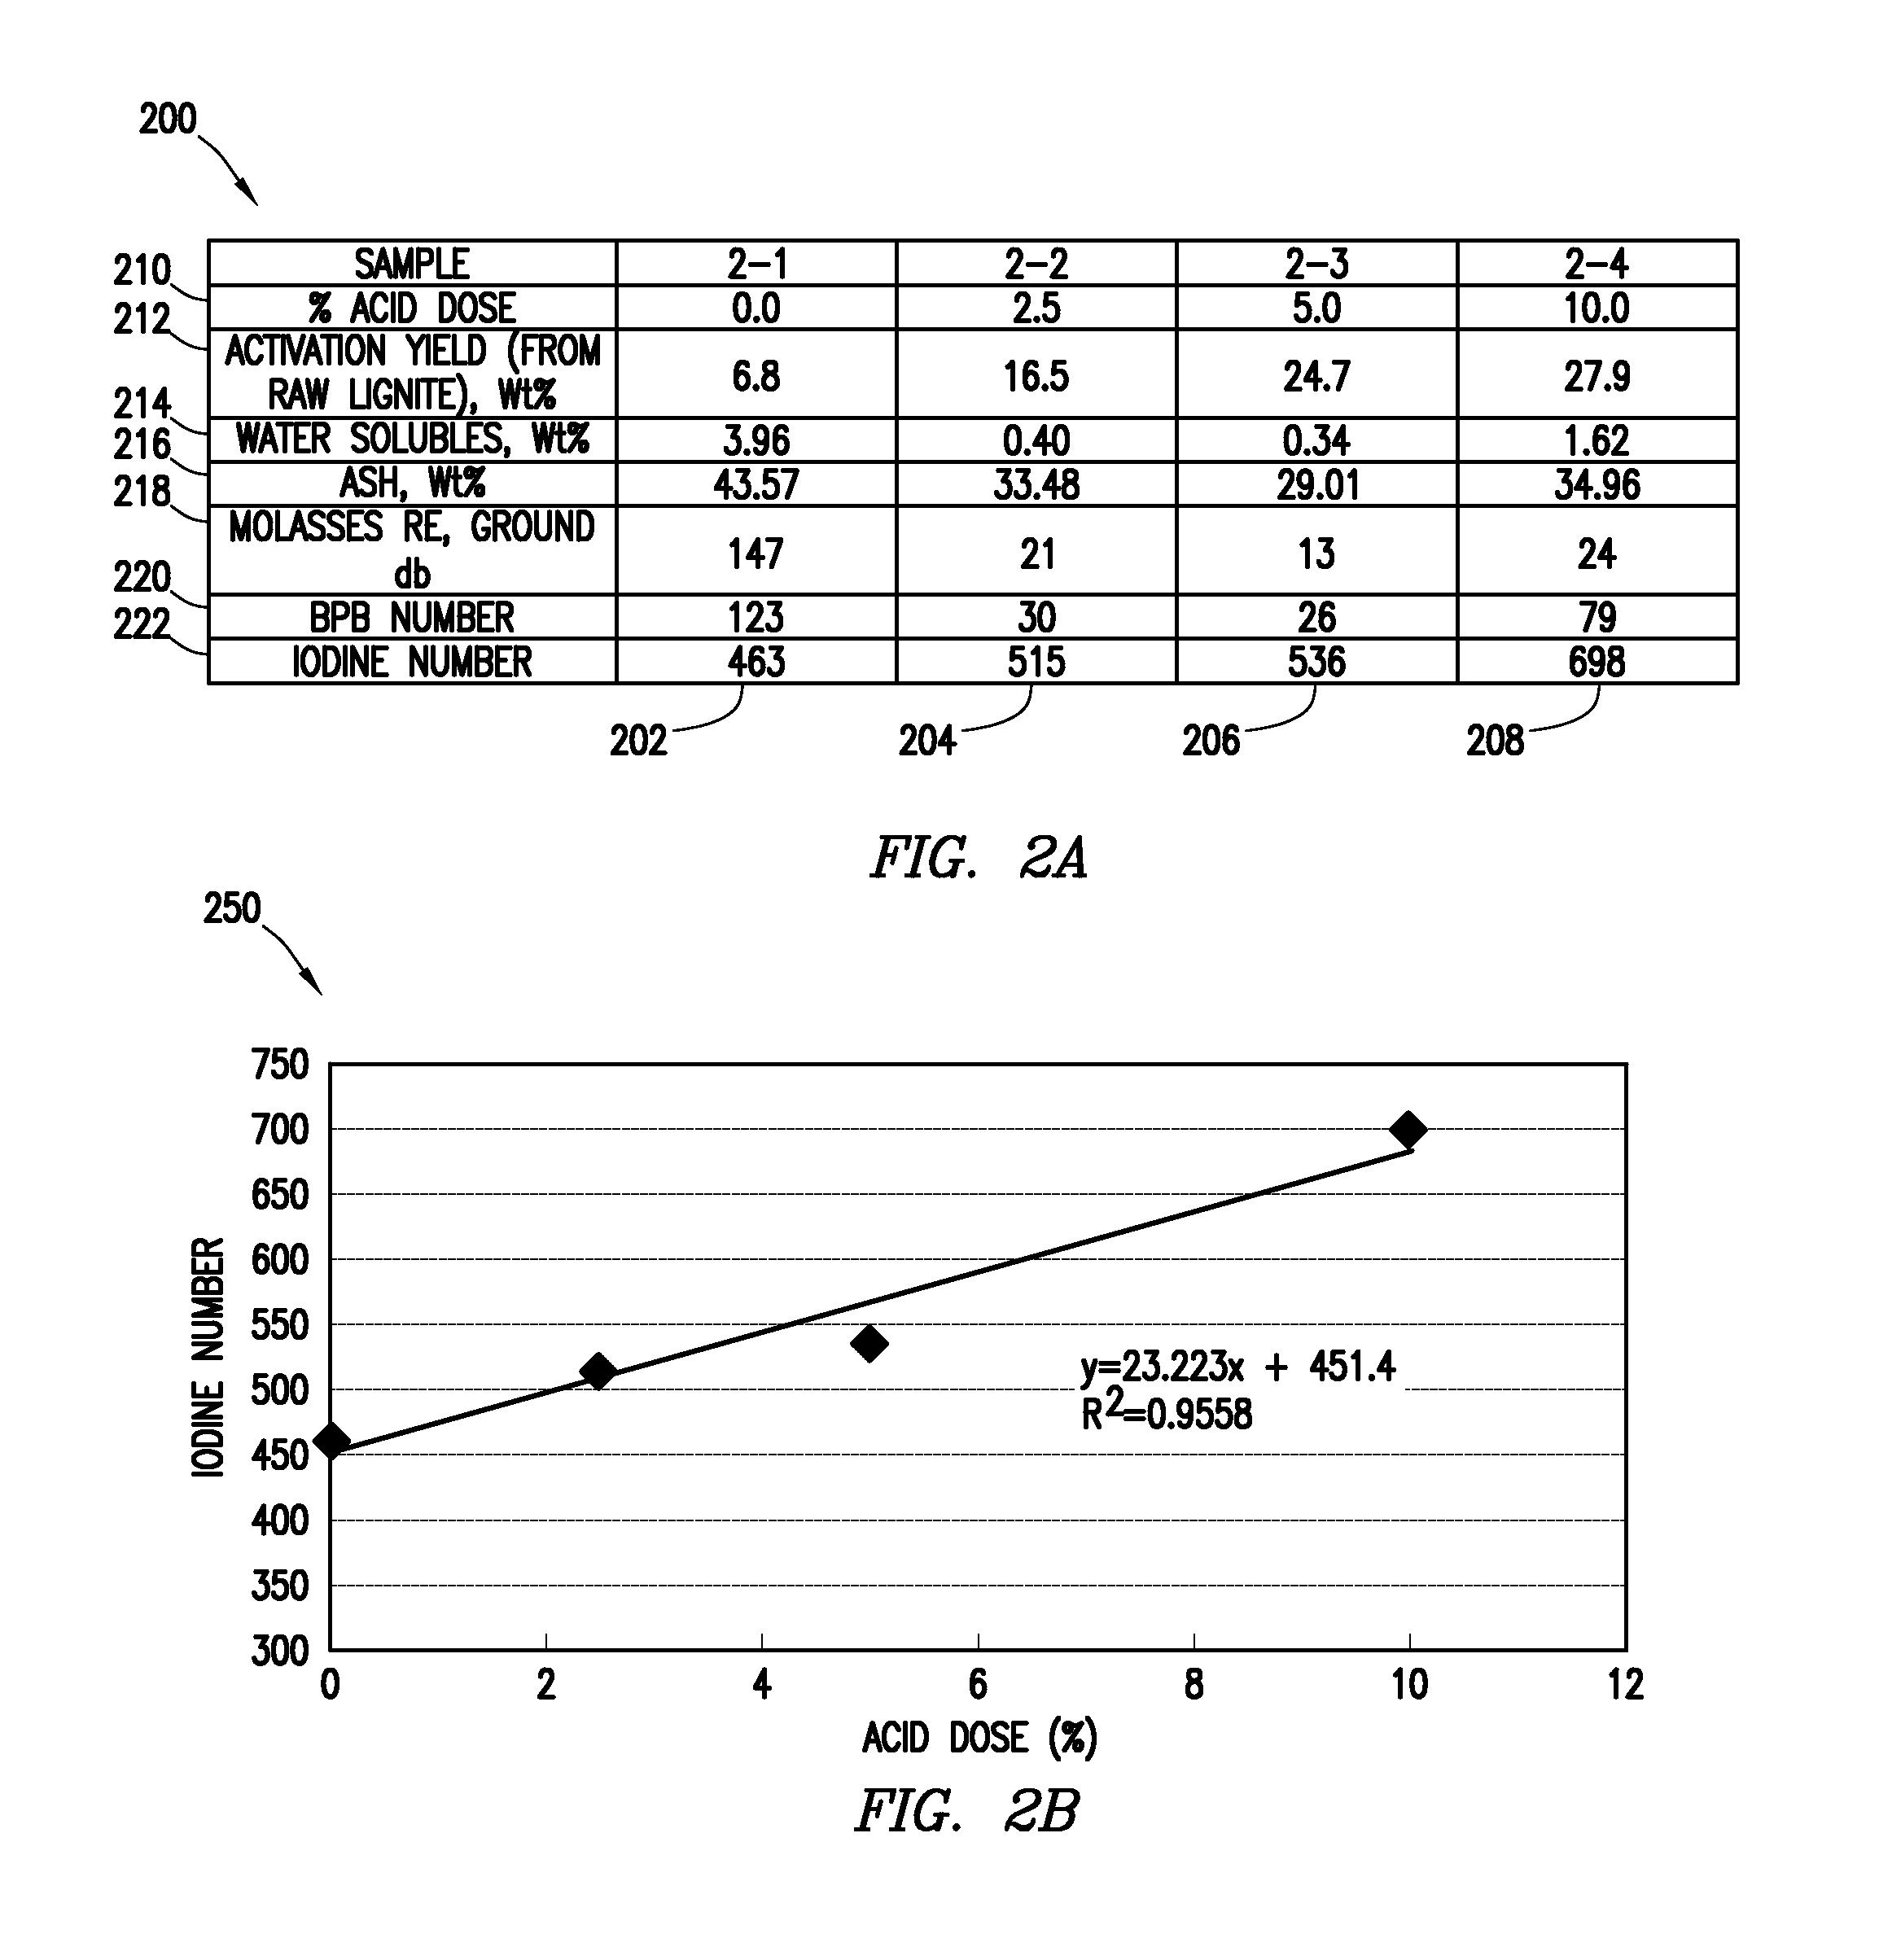 Phosphoric acid treatment of carbonaceous material prior to activation